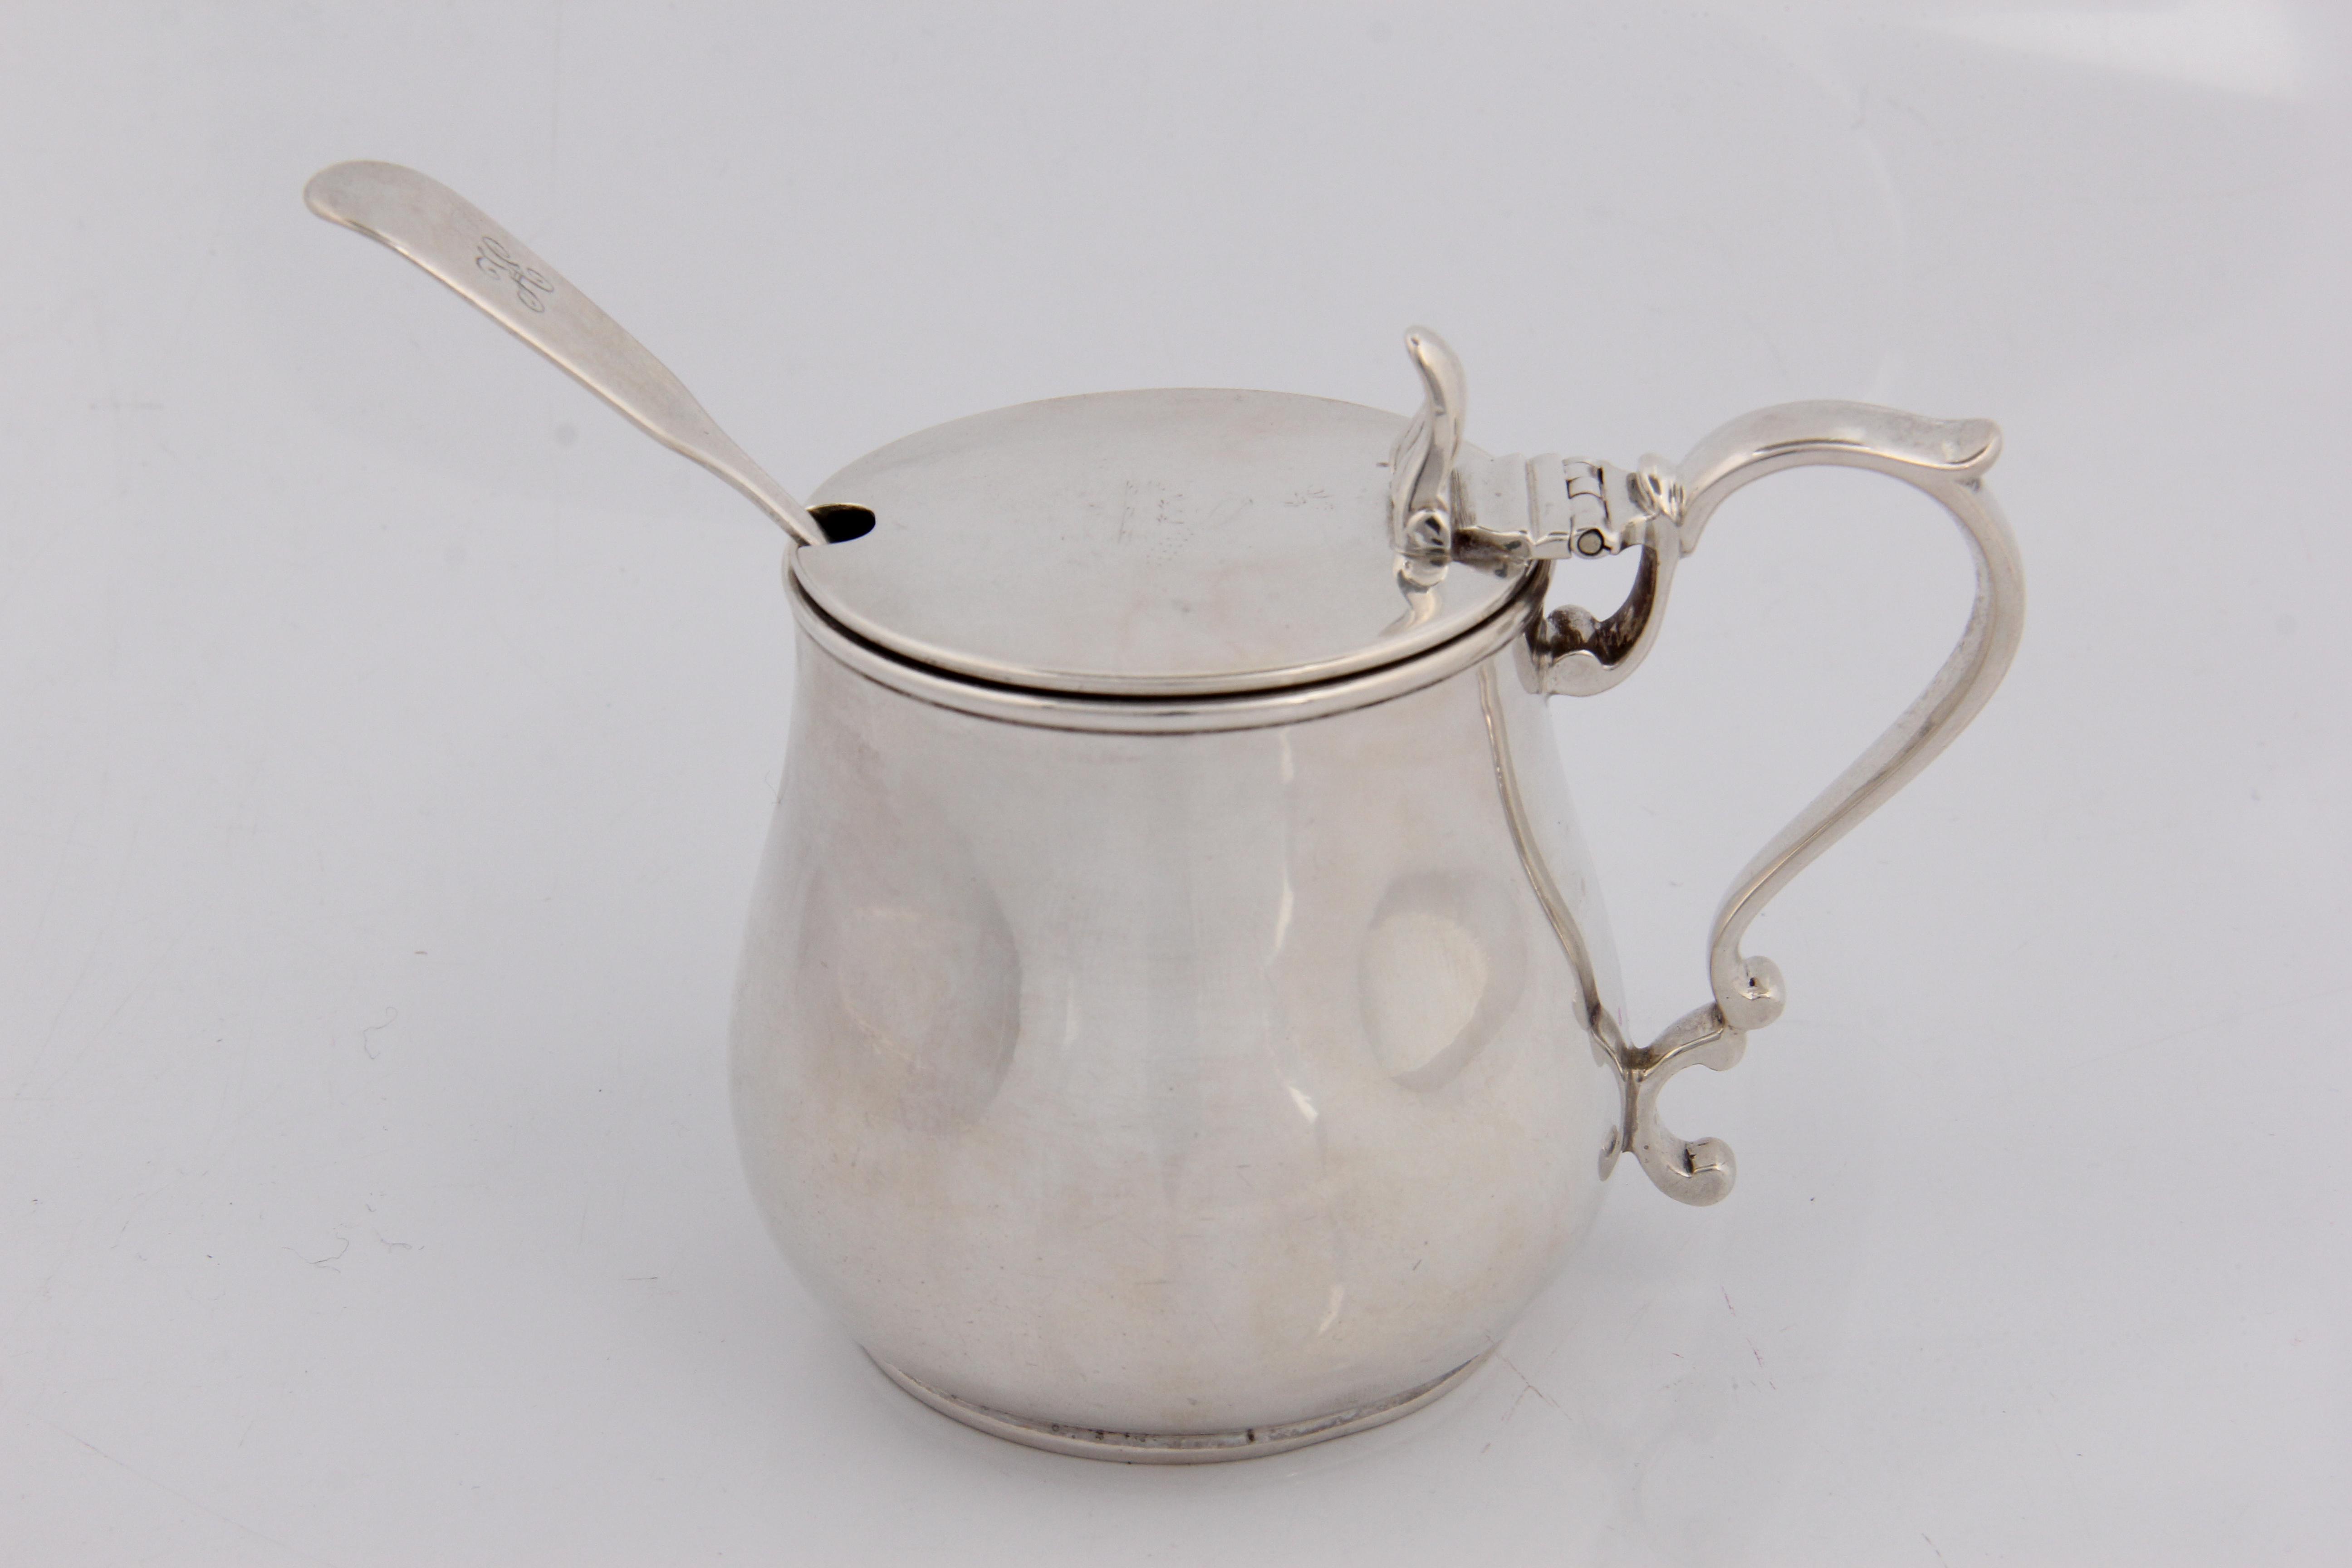 A Victorian silver mustard pot with marks for Birmingham 1863 Elkington & Co